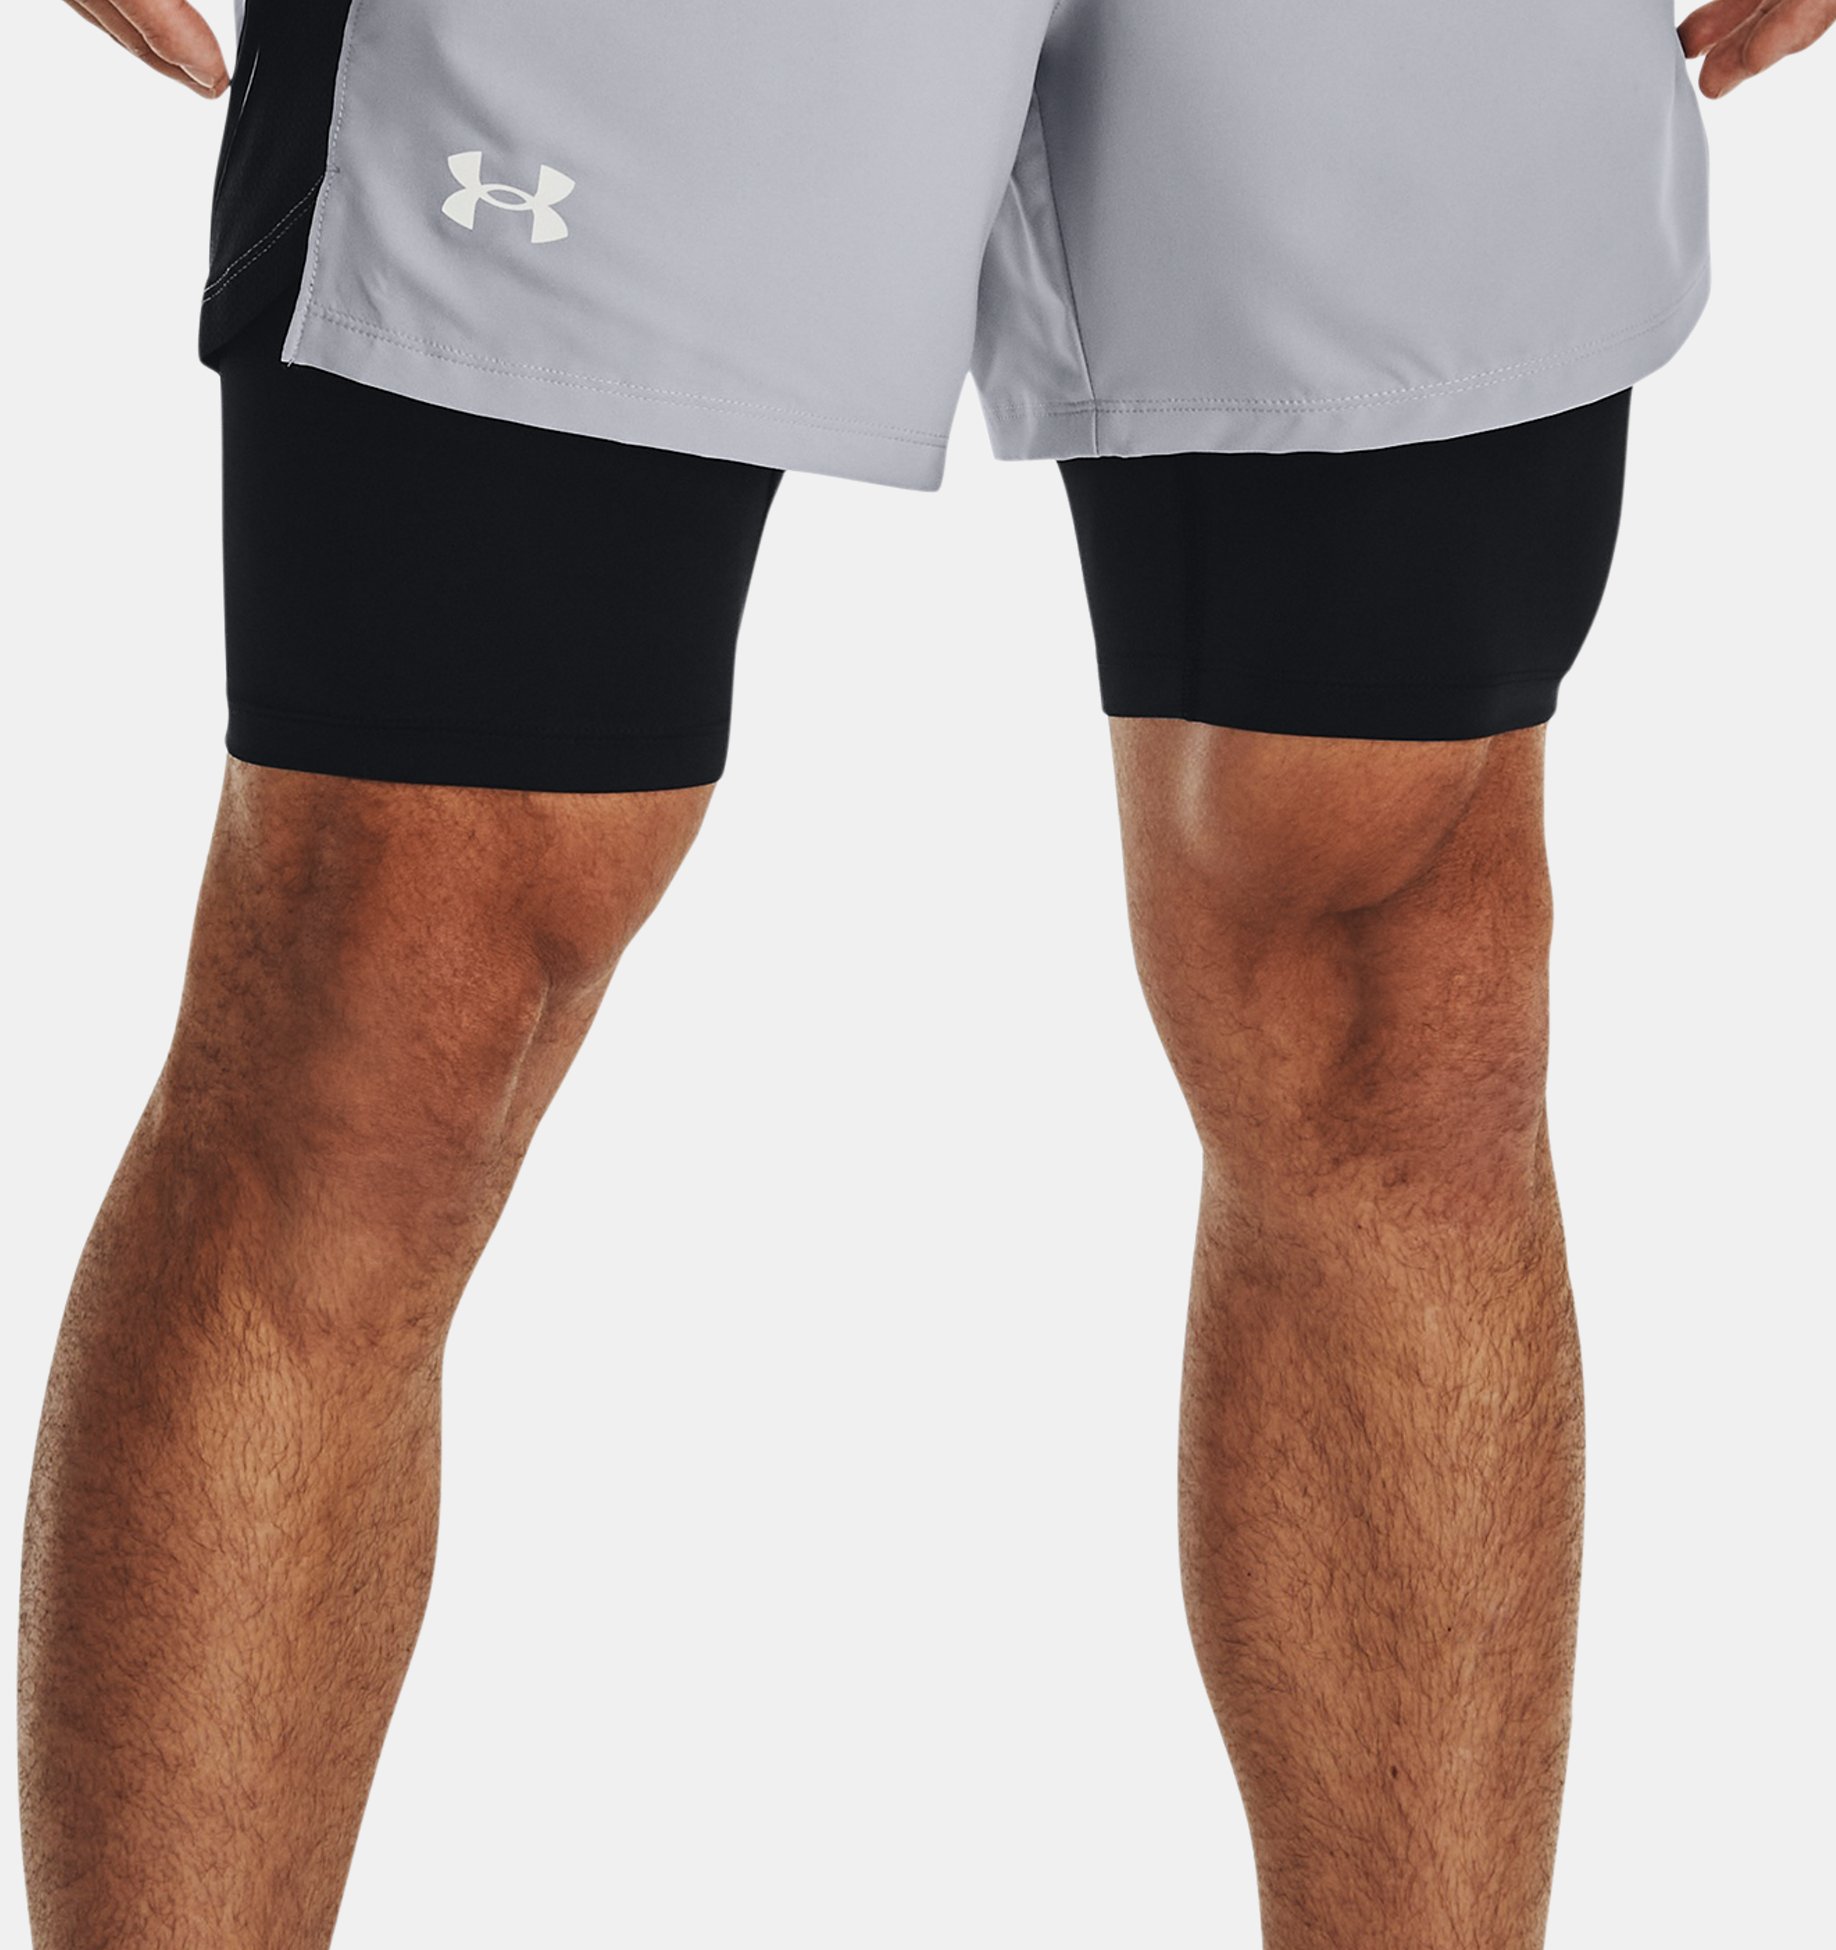 Under Armour, Shorts